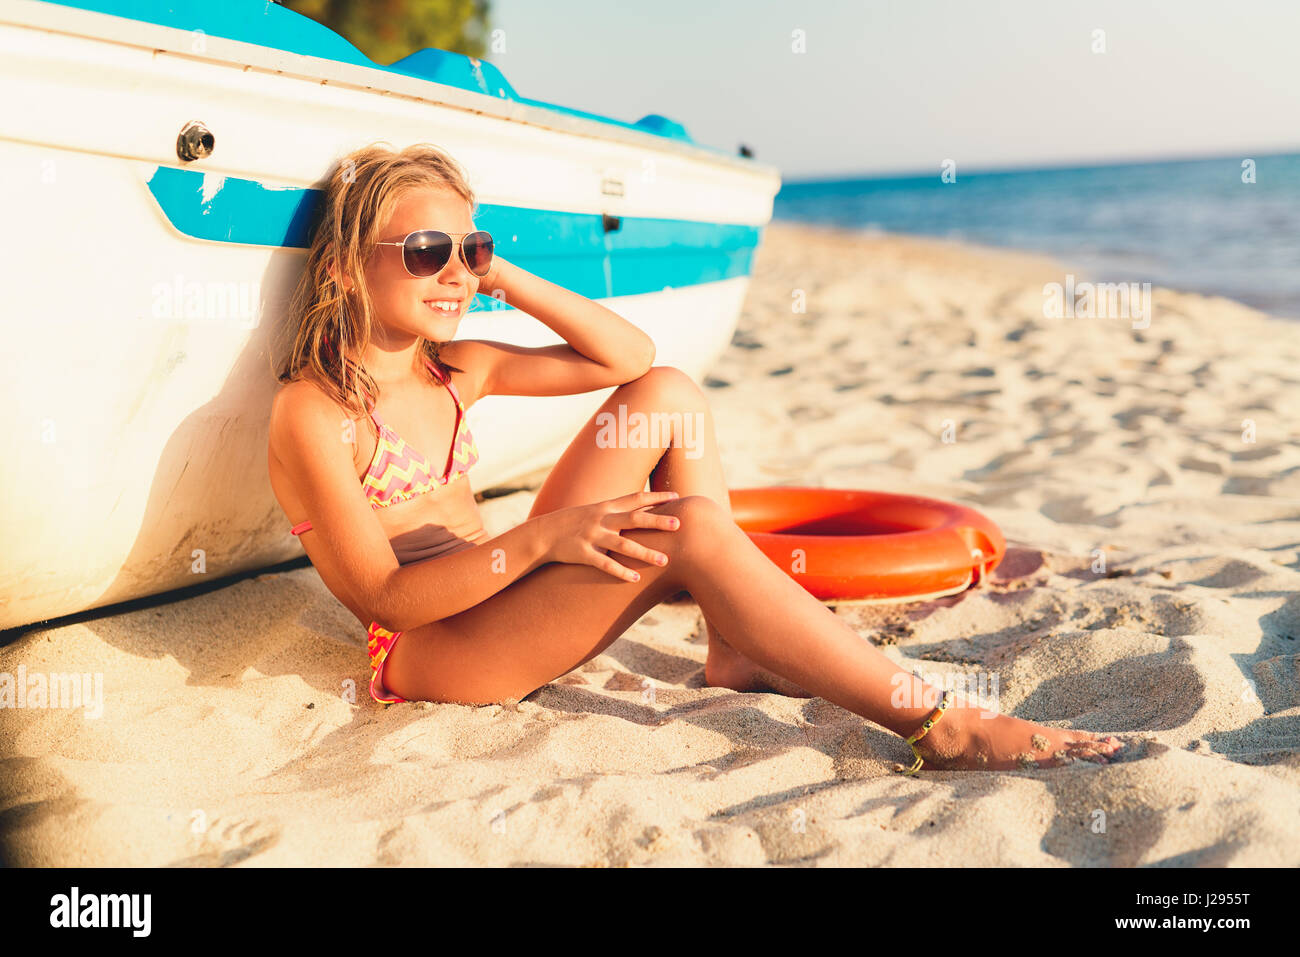 Beautiful little girl with sunglasses relaxing on the beach. She is sitting and sunbathing next to boat. Stock Photo